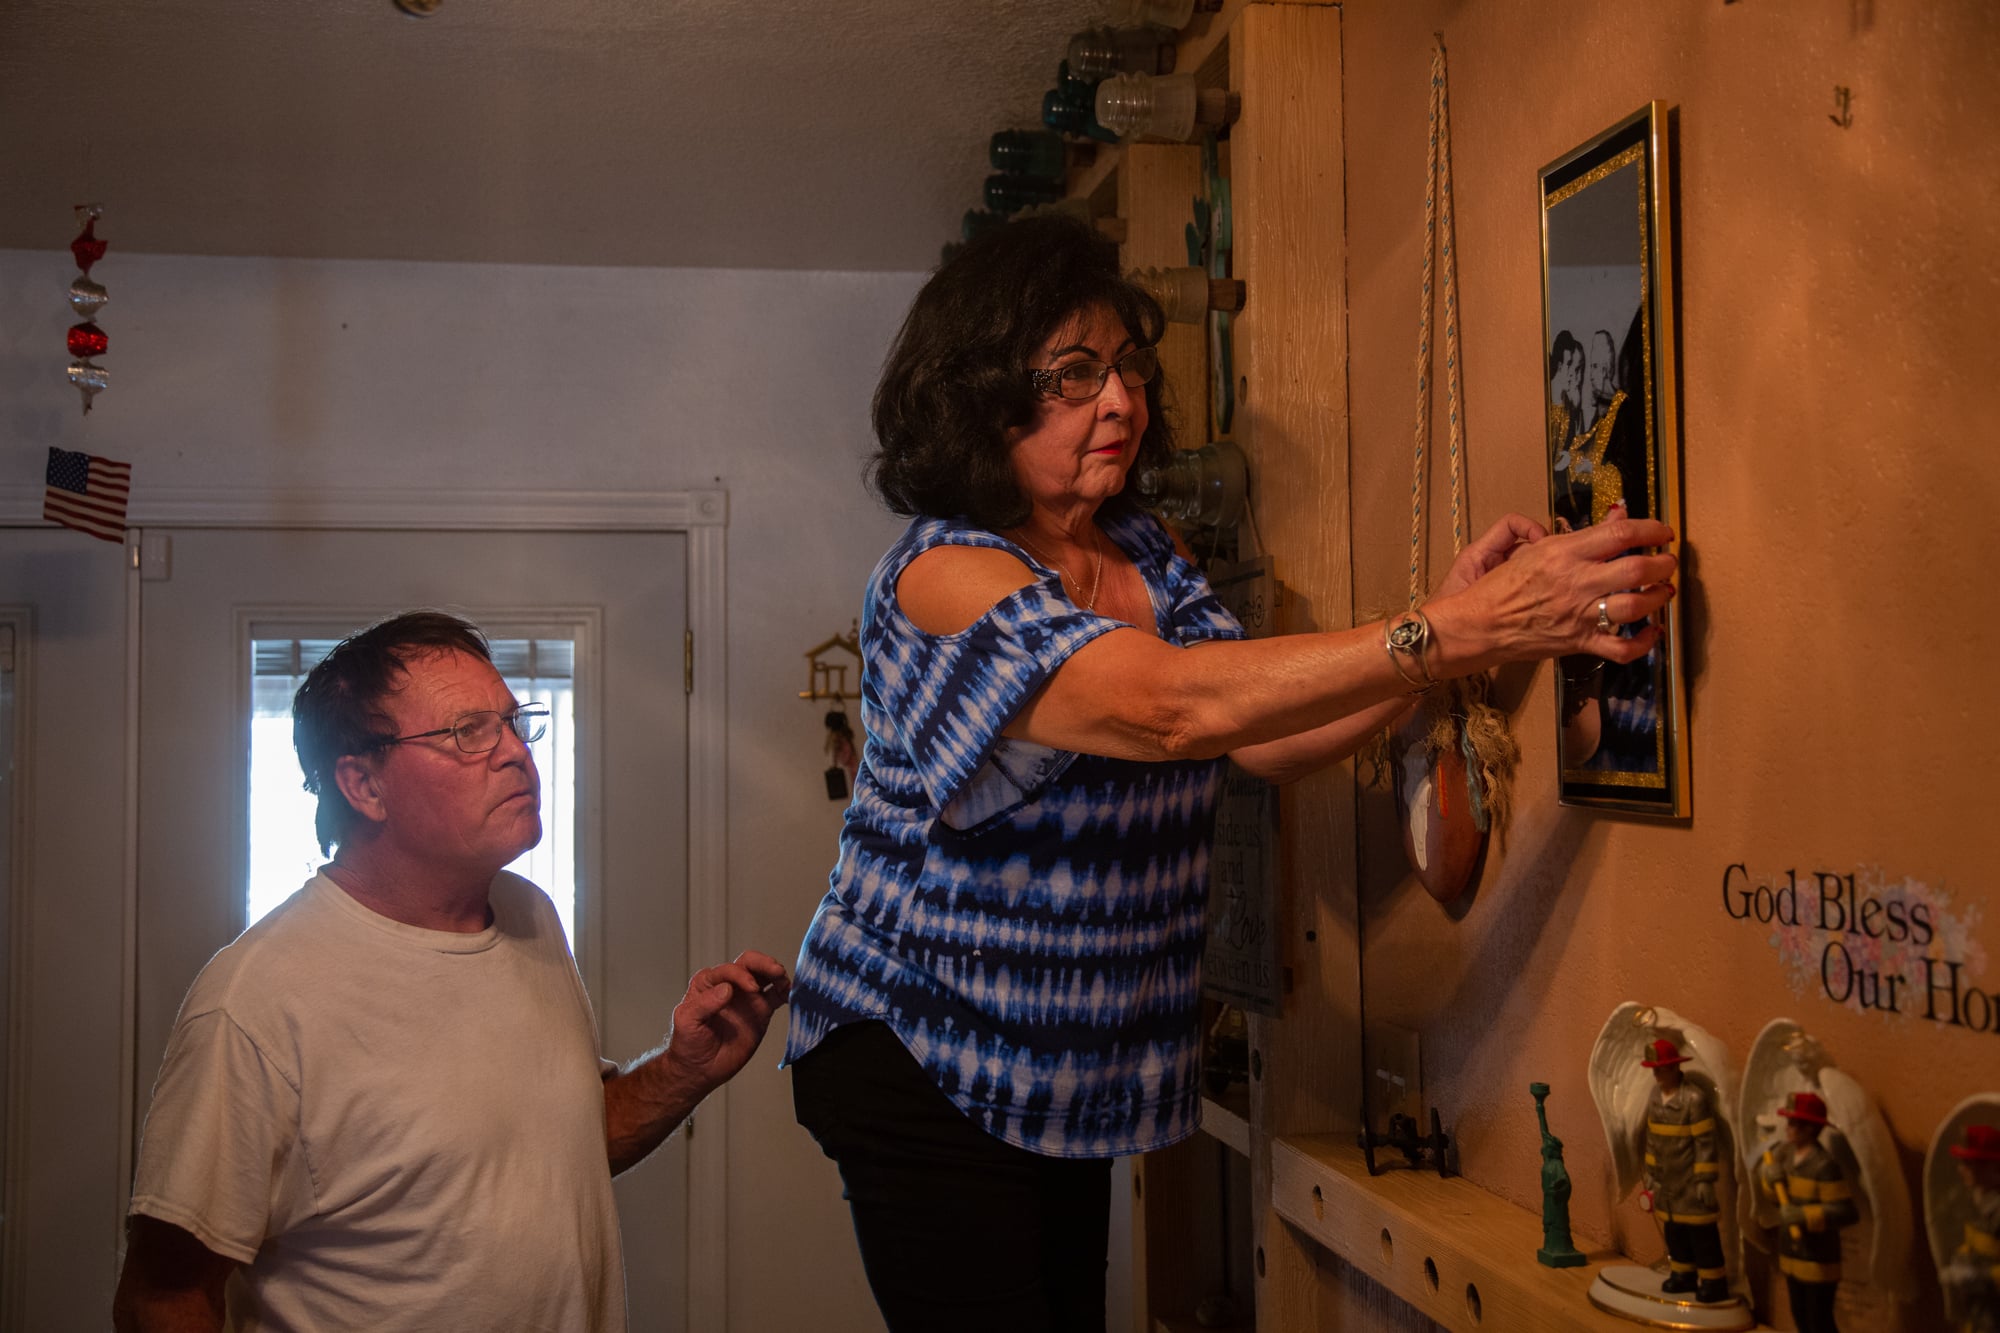 When Pat and John Spencer returned to their home in Roosevelt, Arizona, after a five-day evacuation, three firefighter figurines were among the first things Pat unpacked. She has six firefighters in her family; three of them – her son, husband and nephew – spent more than a week battling the Woodbury Fire in June. (Anton L. Delgado/News21)